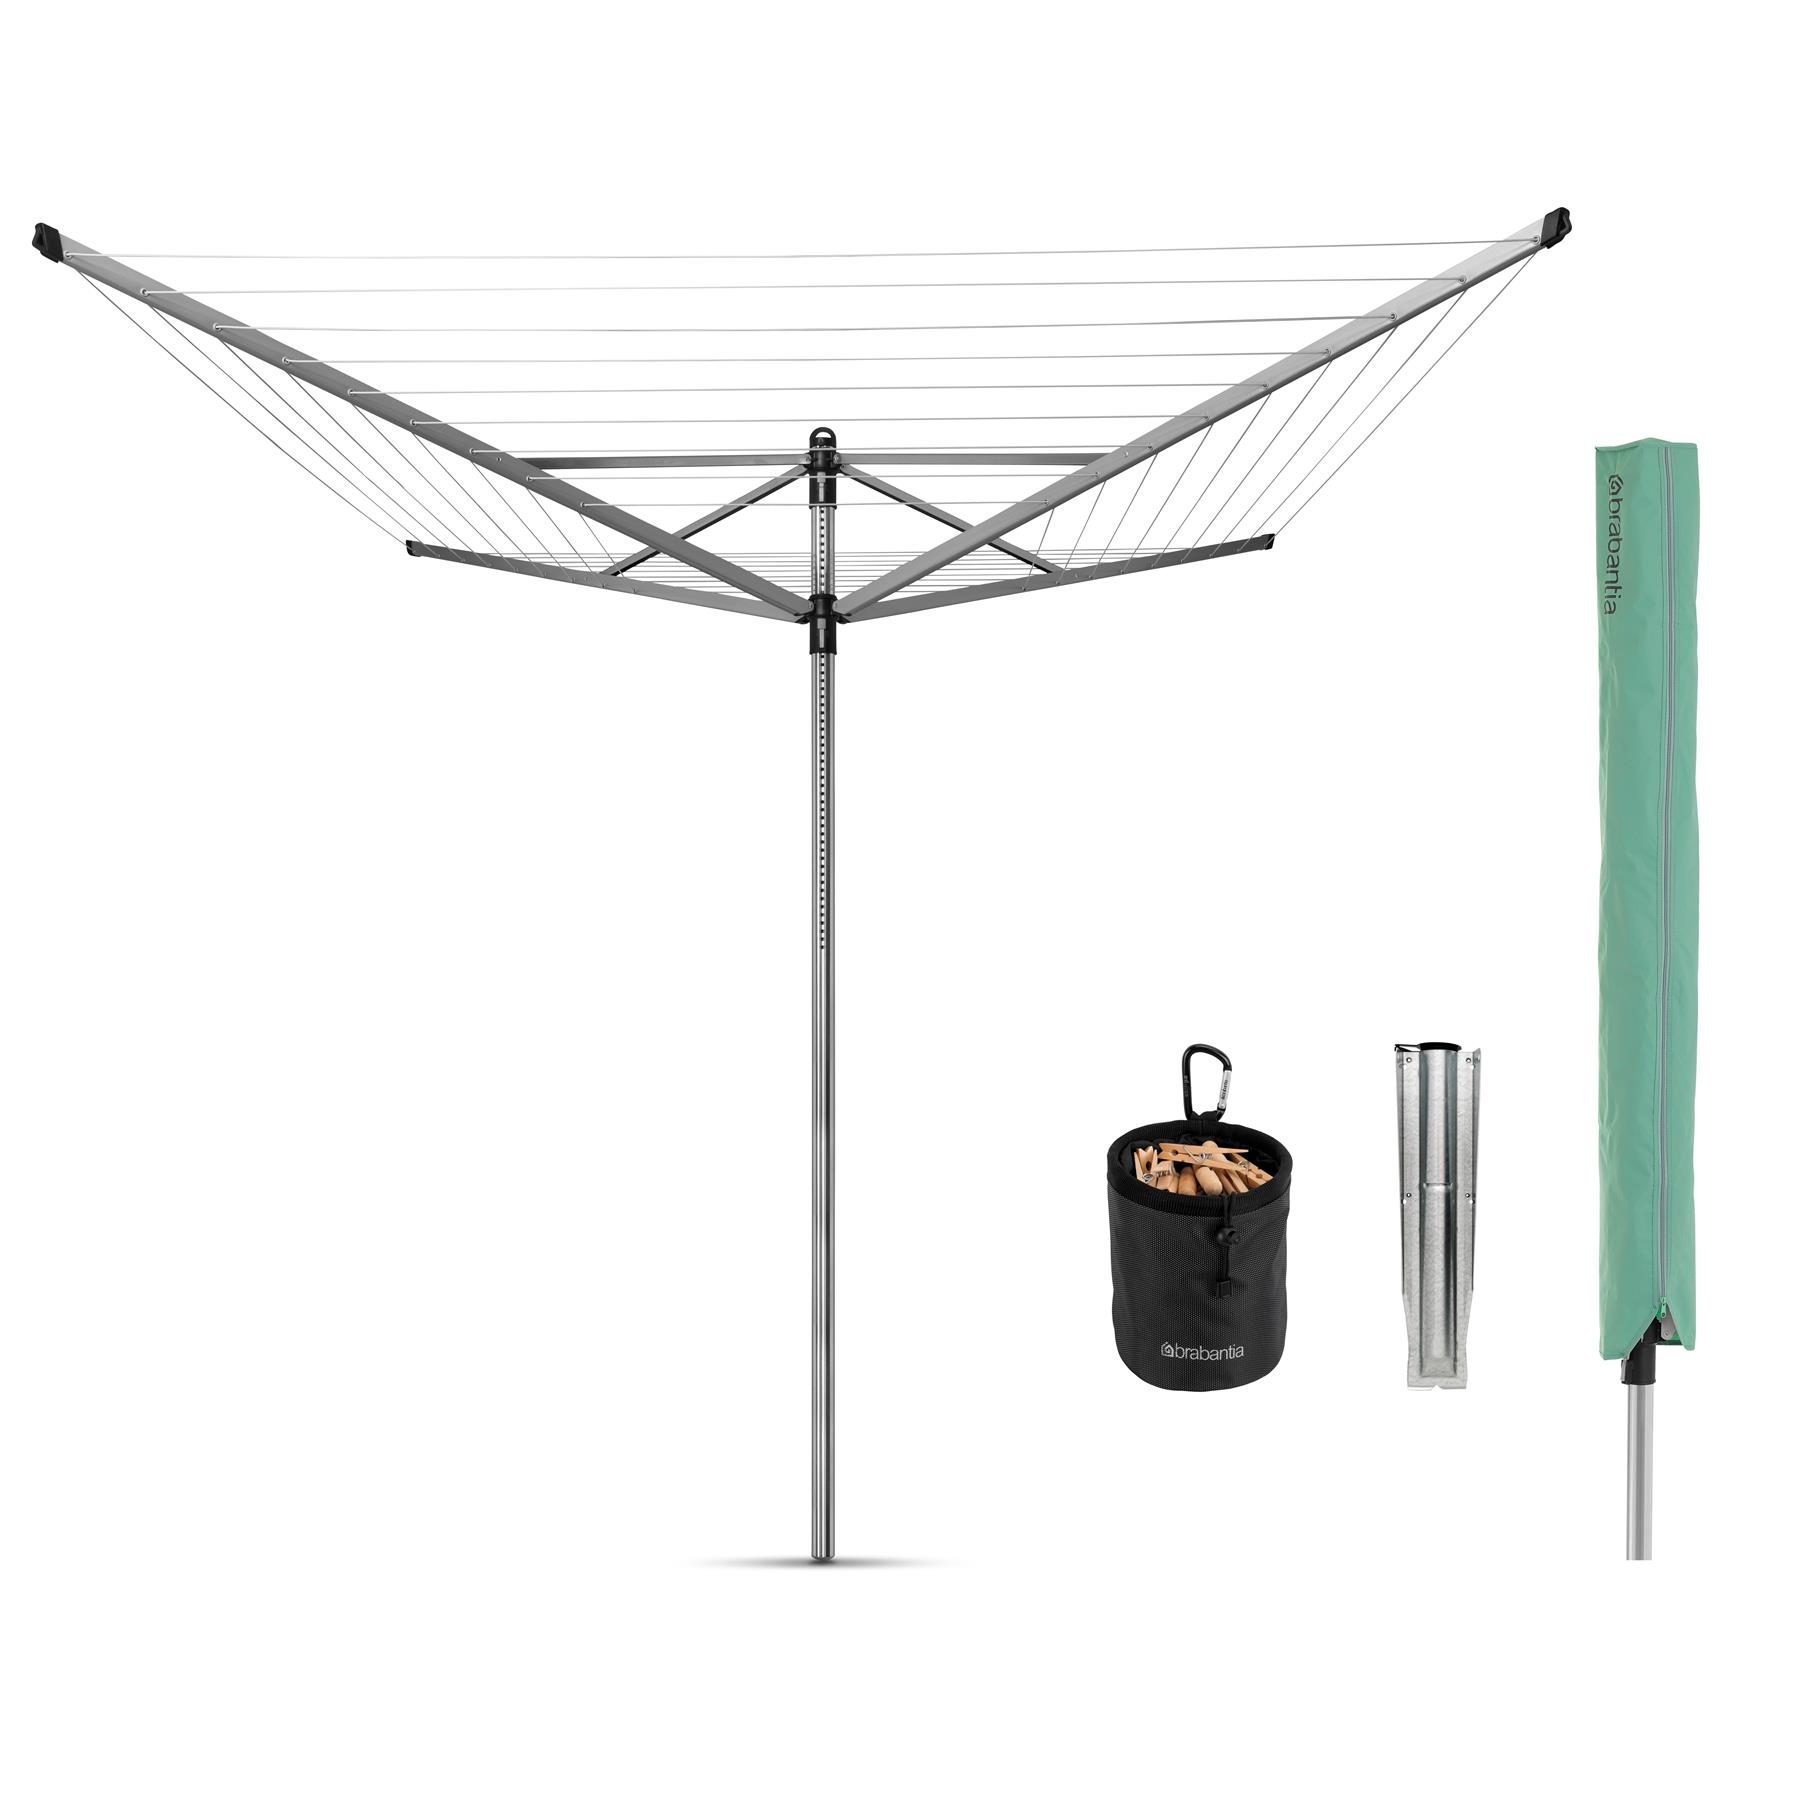 Brabantia Lift-O-Matic Rotary Airer 50m Special Offer Questions & Answers